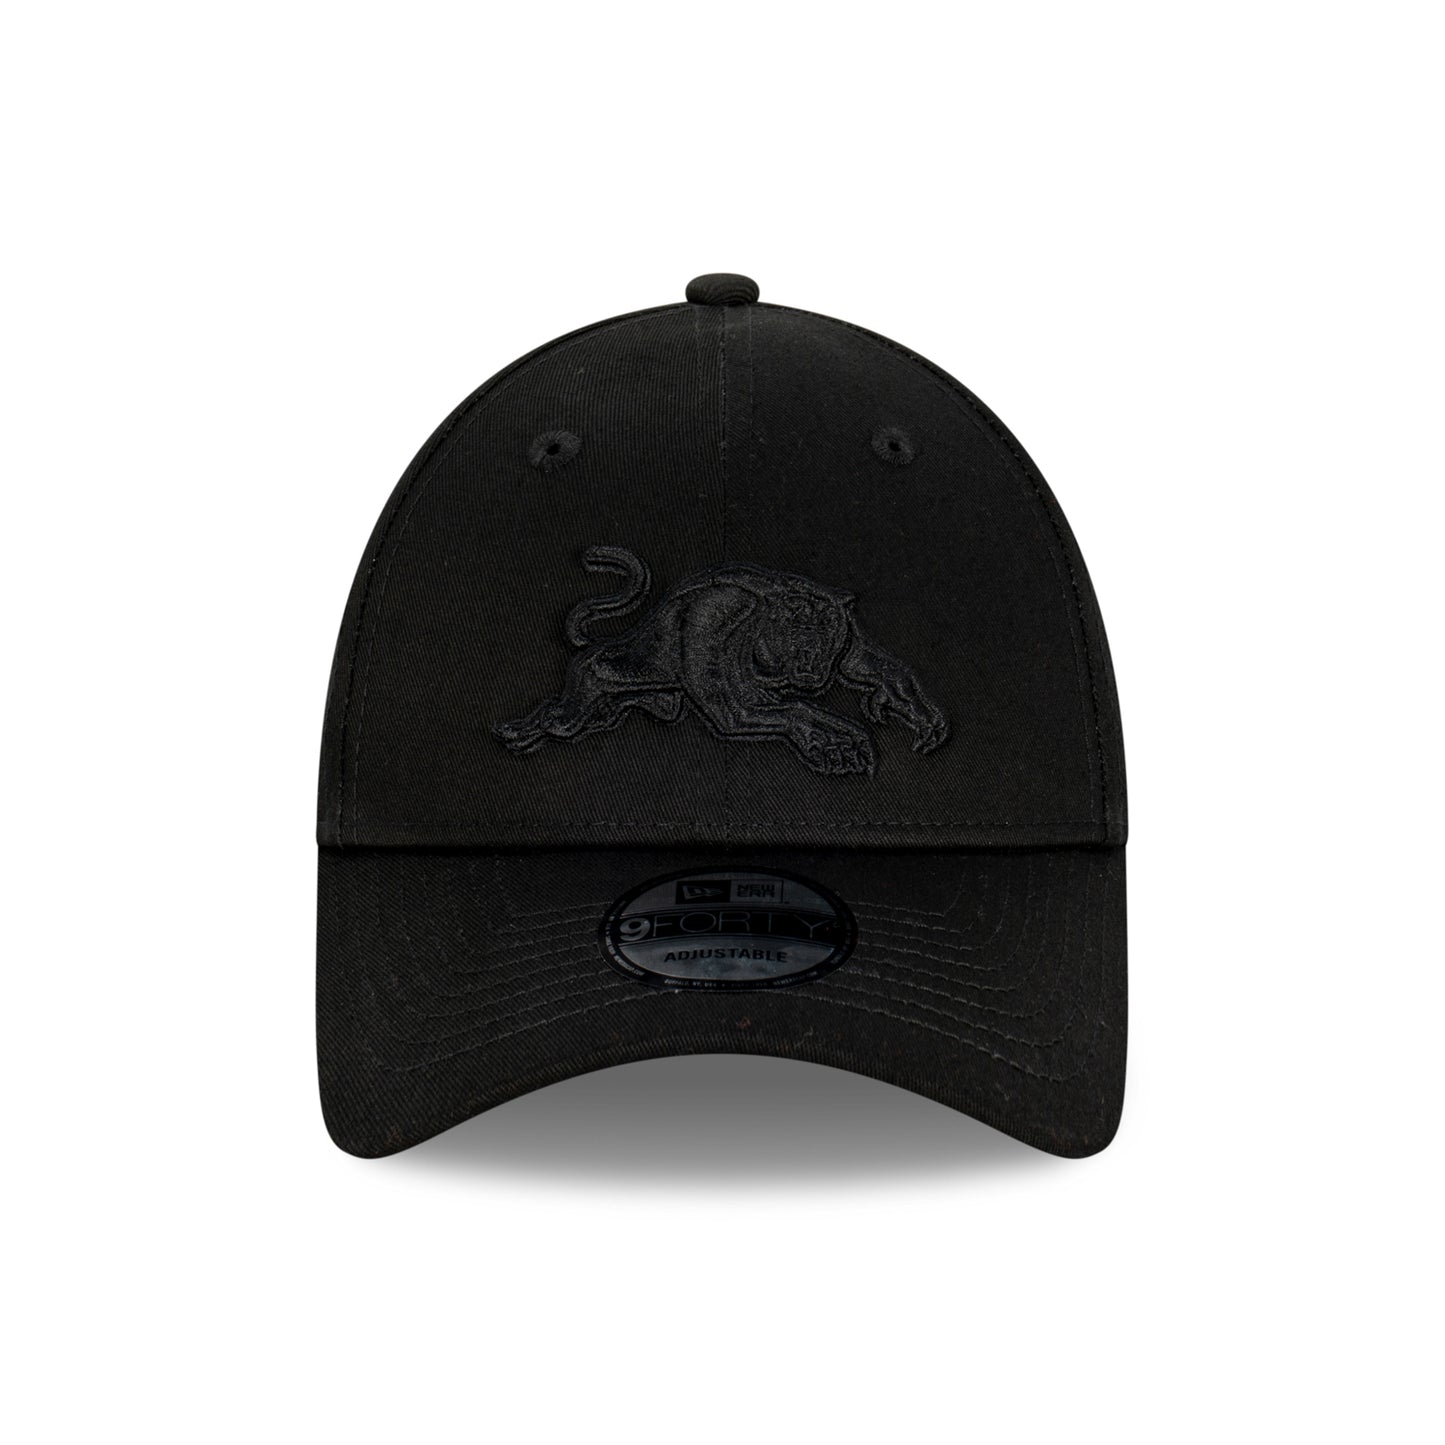 Penrith Panthers 9Forty Snapback Cap